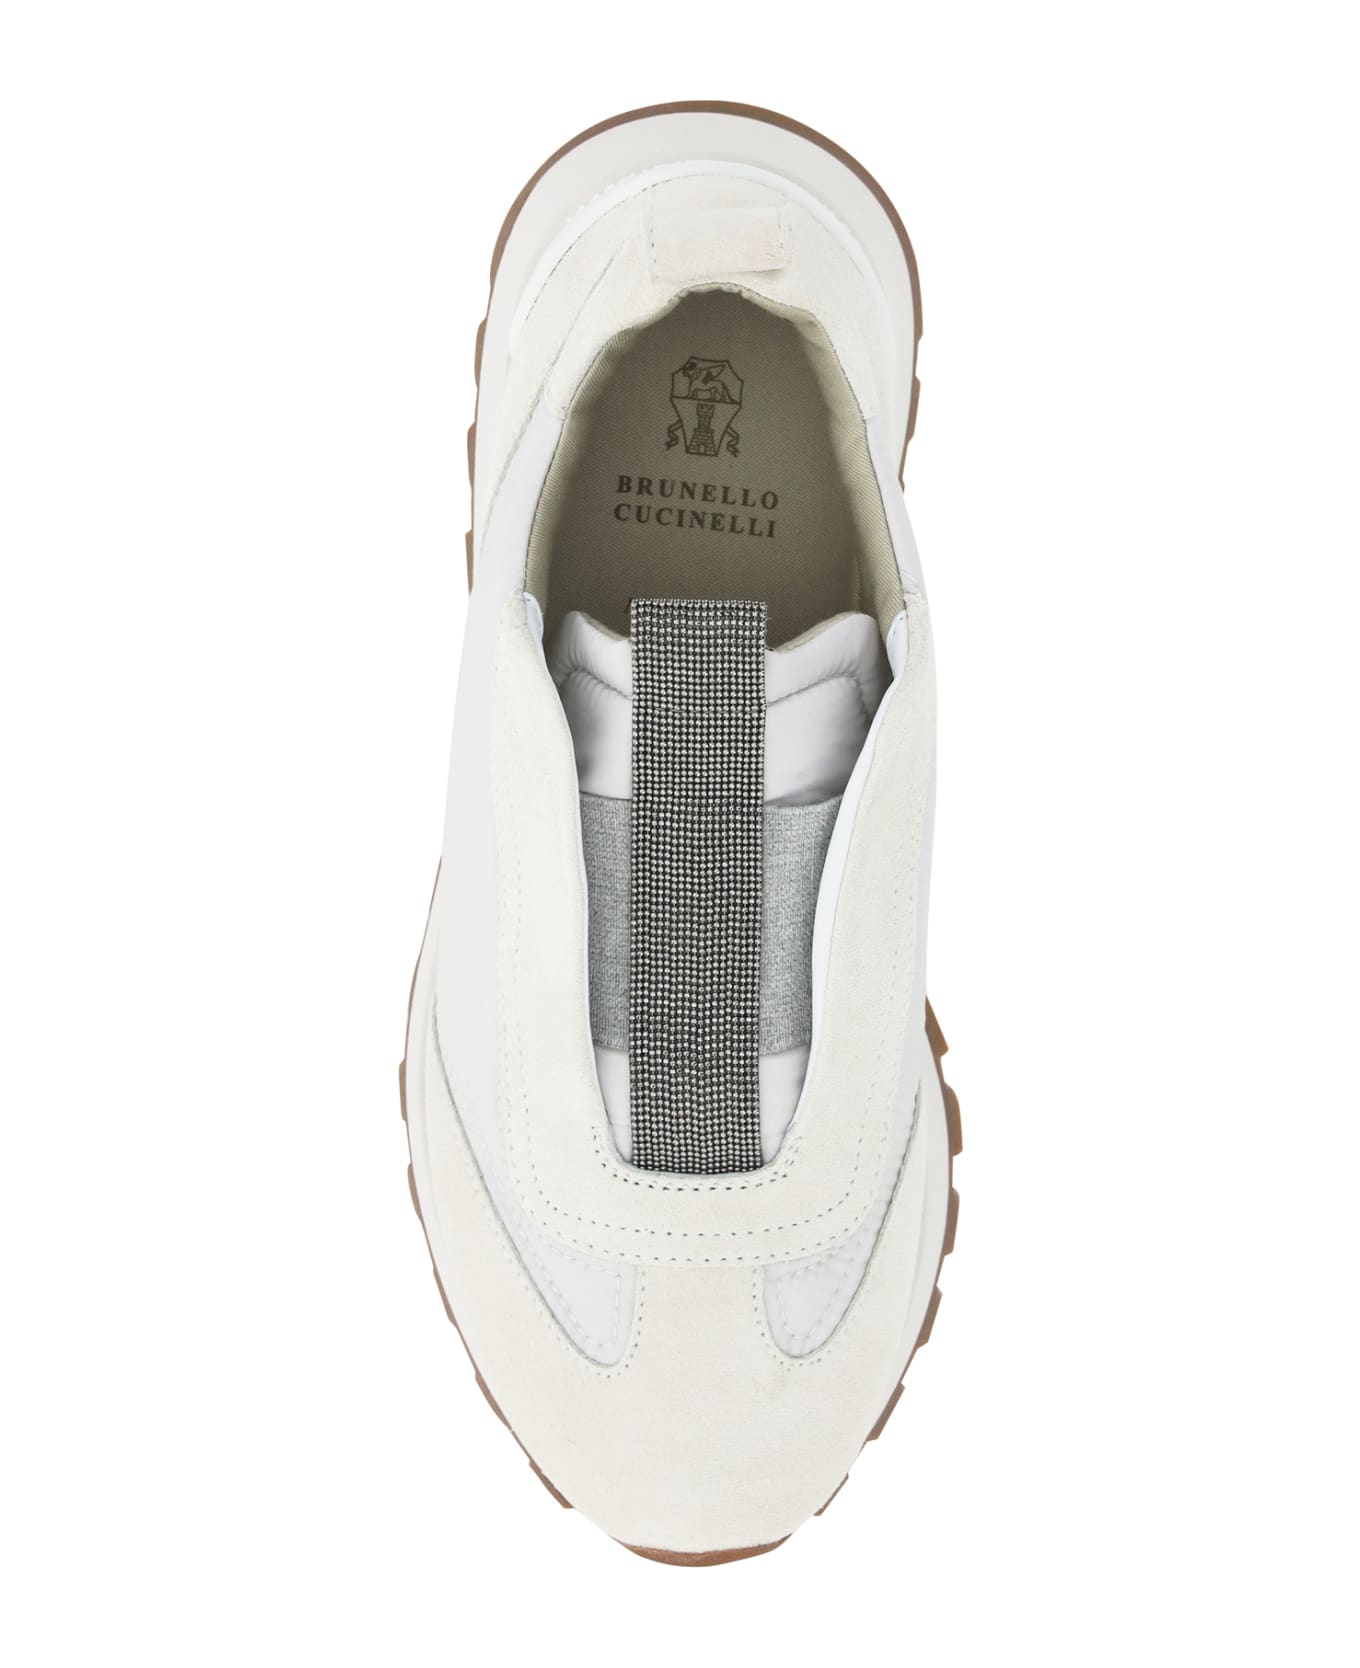 Brunello Cucinelli Embellished Slip-on Sneakers - White